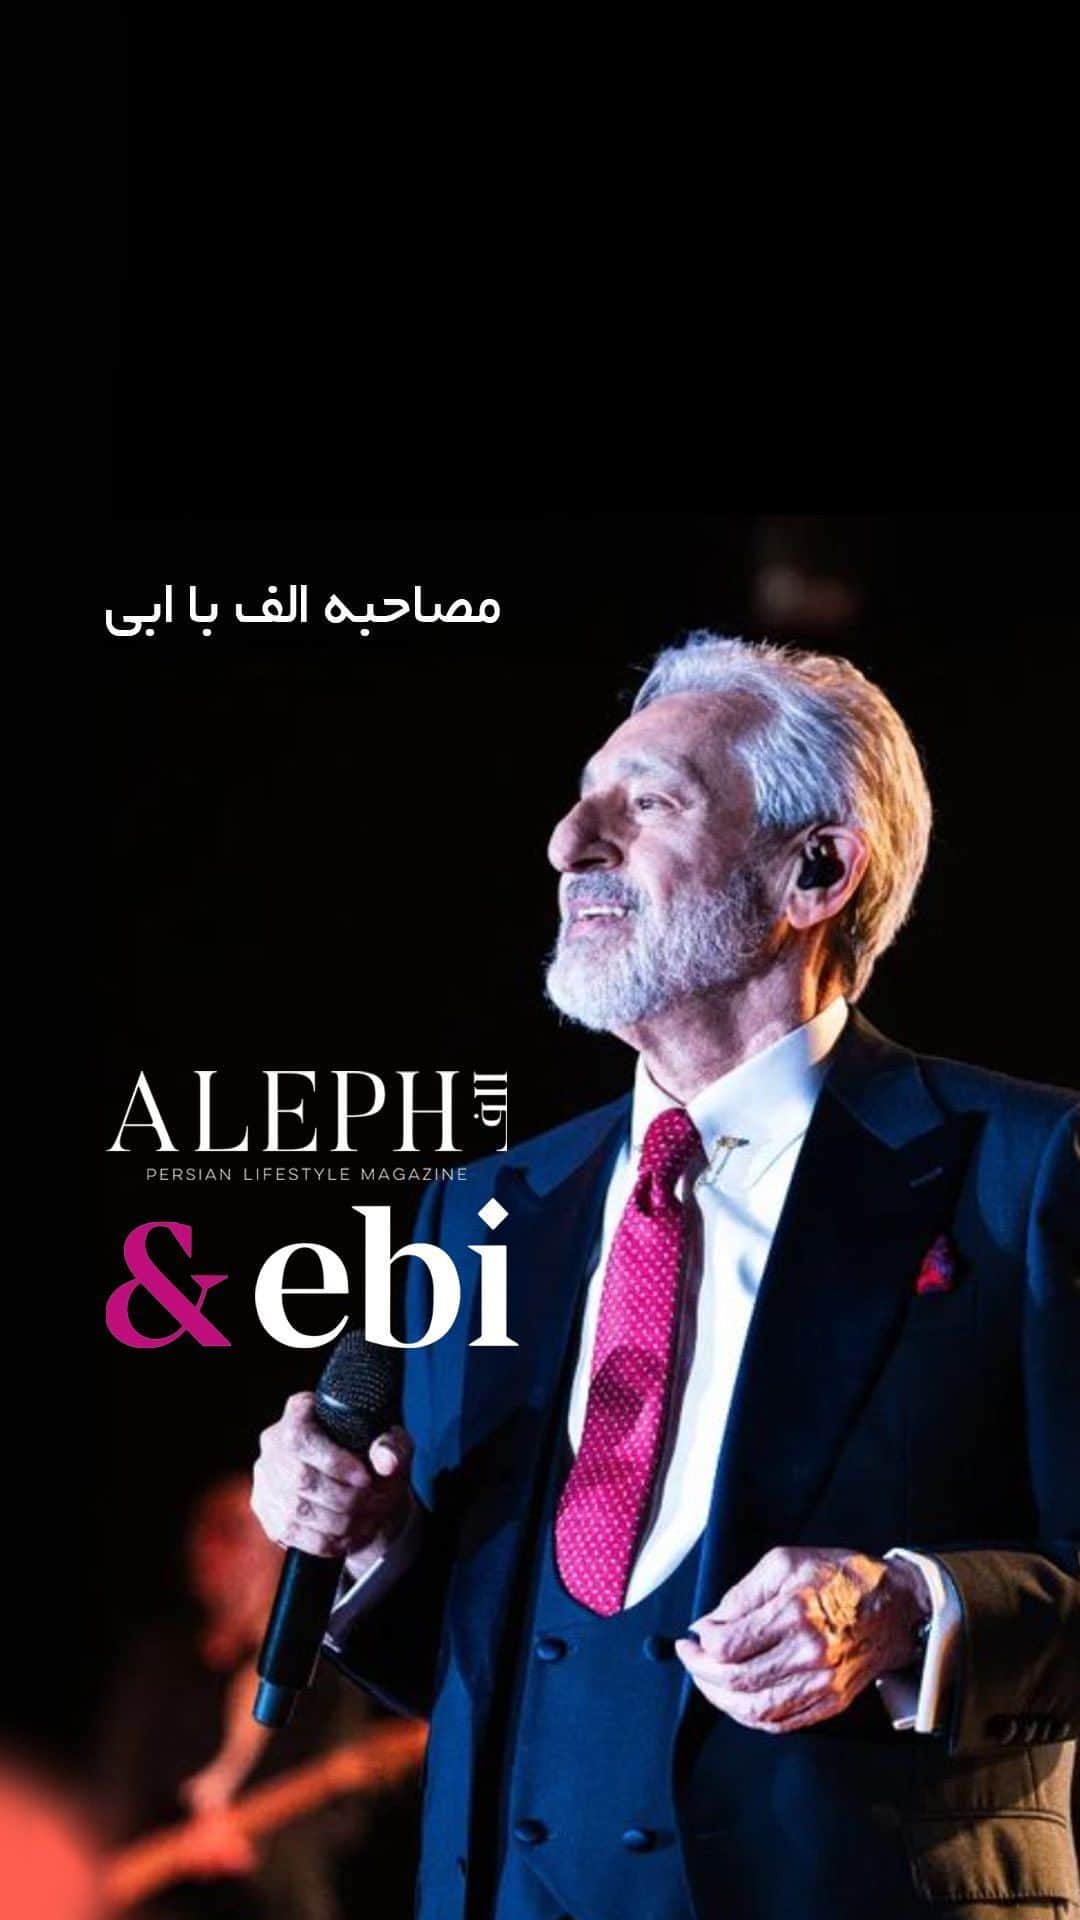 Ebiのインスタグラム：「We had the incredible opportunity to meet Ebi, one of the legends of Persian music, following his concert in Vancouver. In this exclusive interview, you’ll get a glimpse into lesser-explored aspects of his life and experiences, far beyond the realm of music.  Stay tuned to watch this captivating conversations with the iconic Ebi on an upcoming episode of ALEPH TV!  Special thanks to the legend @ebi  Interview by @aleph.magazine  Host @fereshteh.khm」